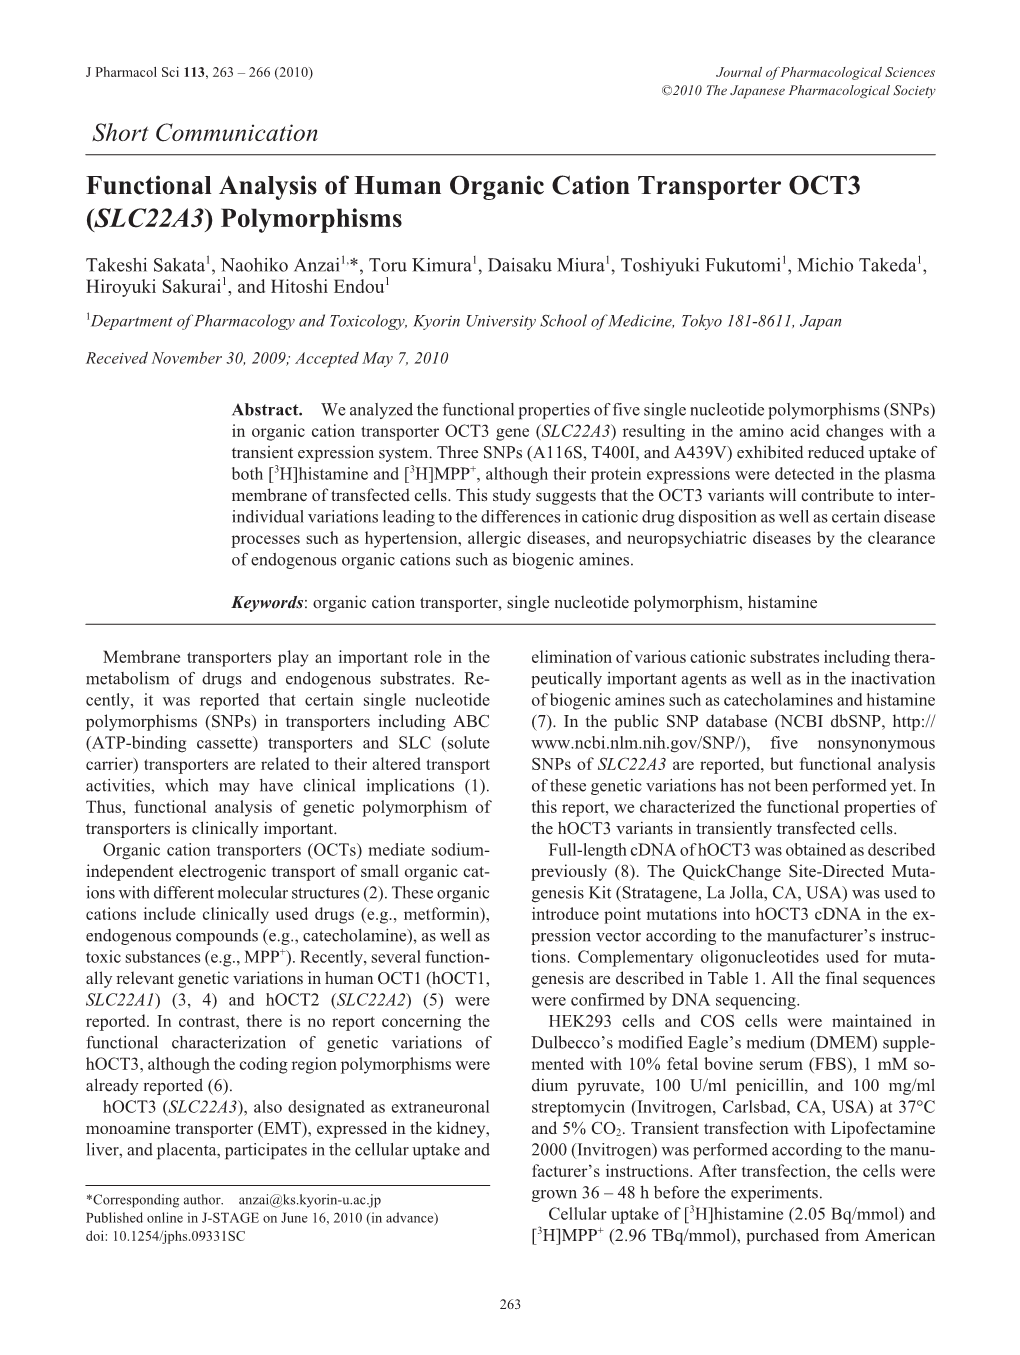 Functional Analysis of Human Organic Cation Transporter OCT3 (SLC22A3 ) Polymorphisms